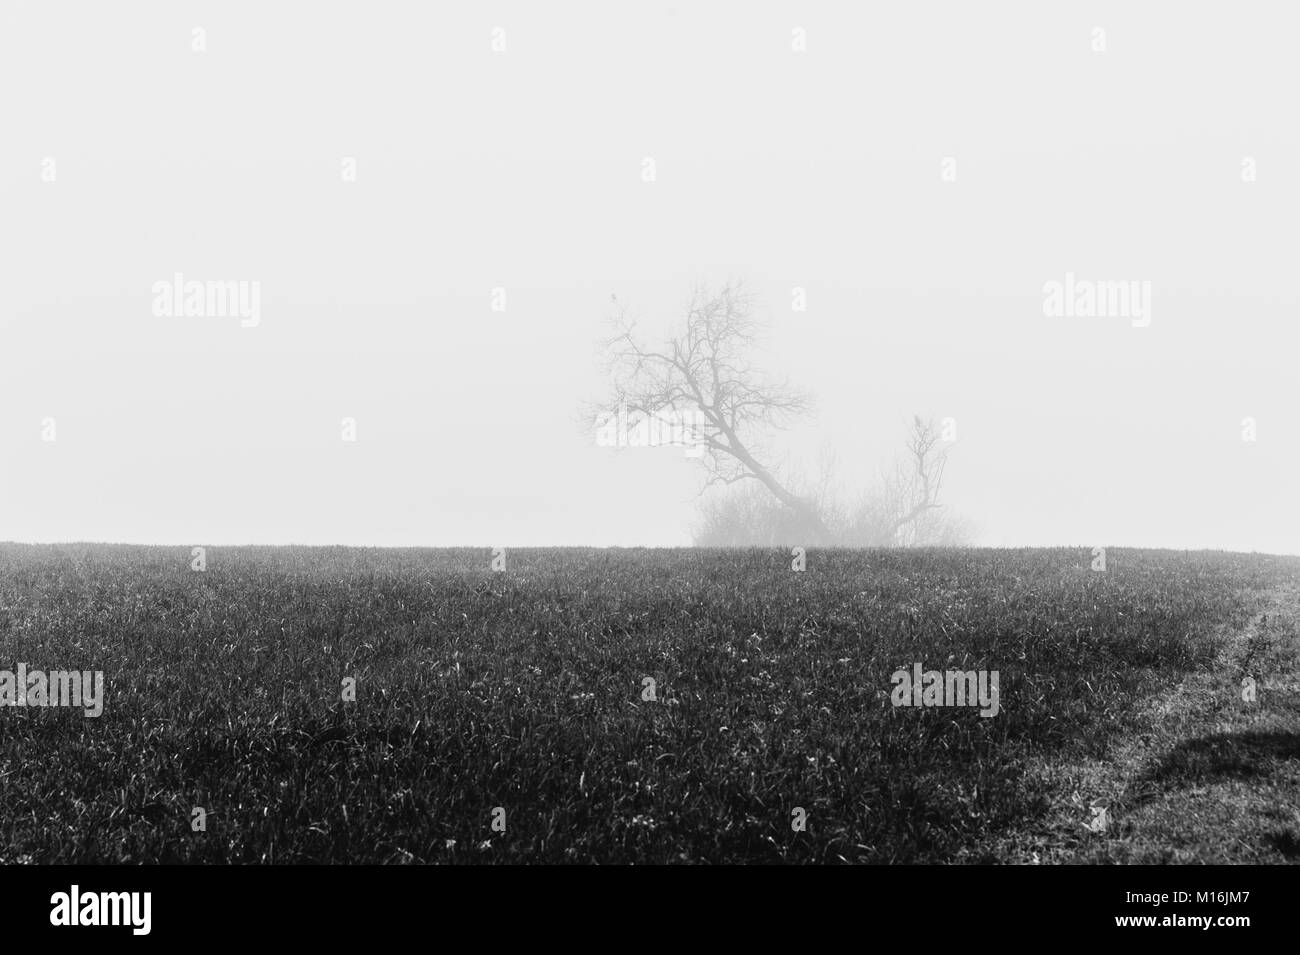 Isolated tree in a misty weather, Monochrome, Luxembourg Stock Photo